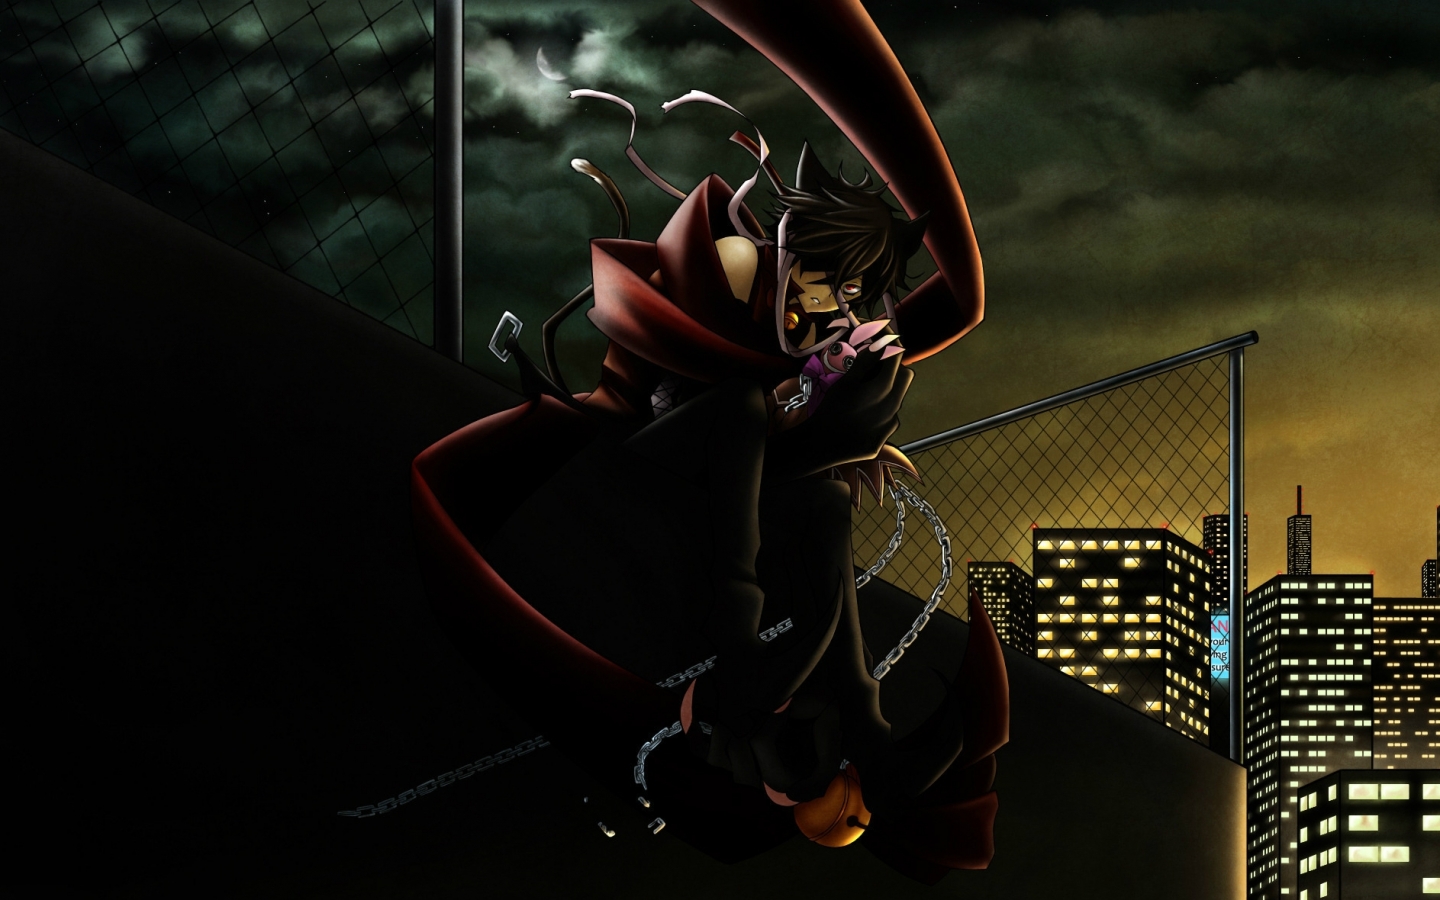 anime wallpaper 1440x900,action adventure game,pc game,darkness,cg artwork,fictional character